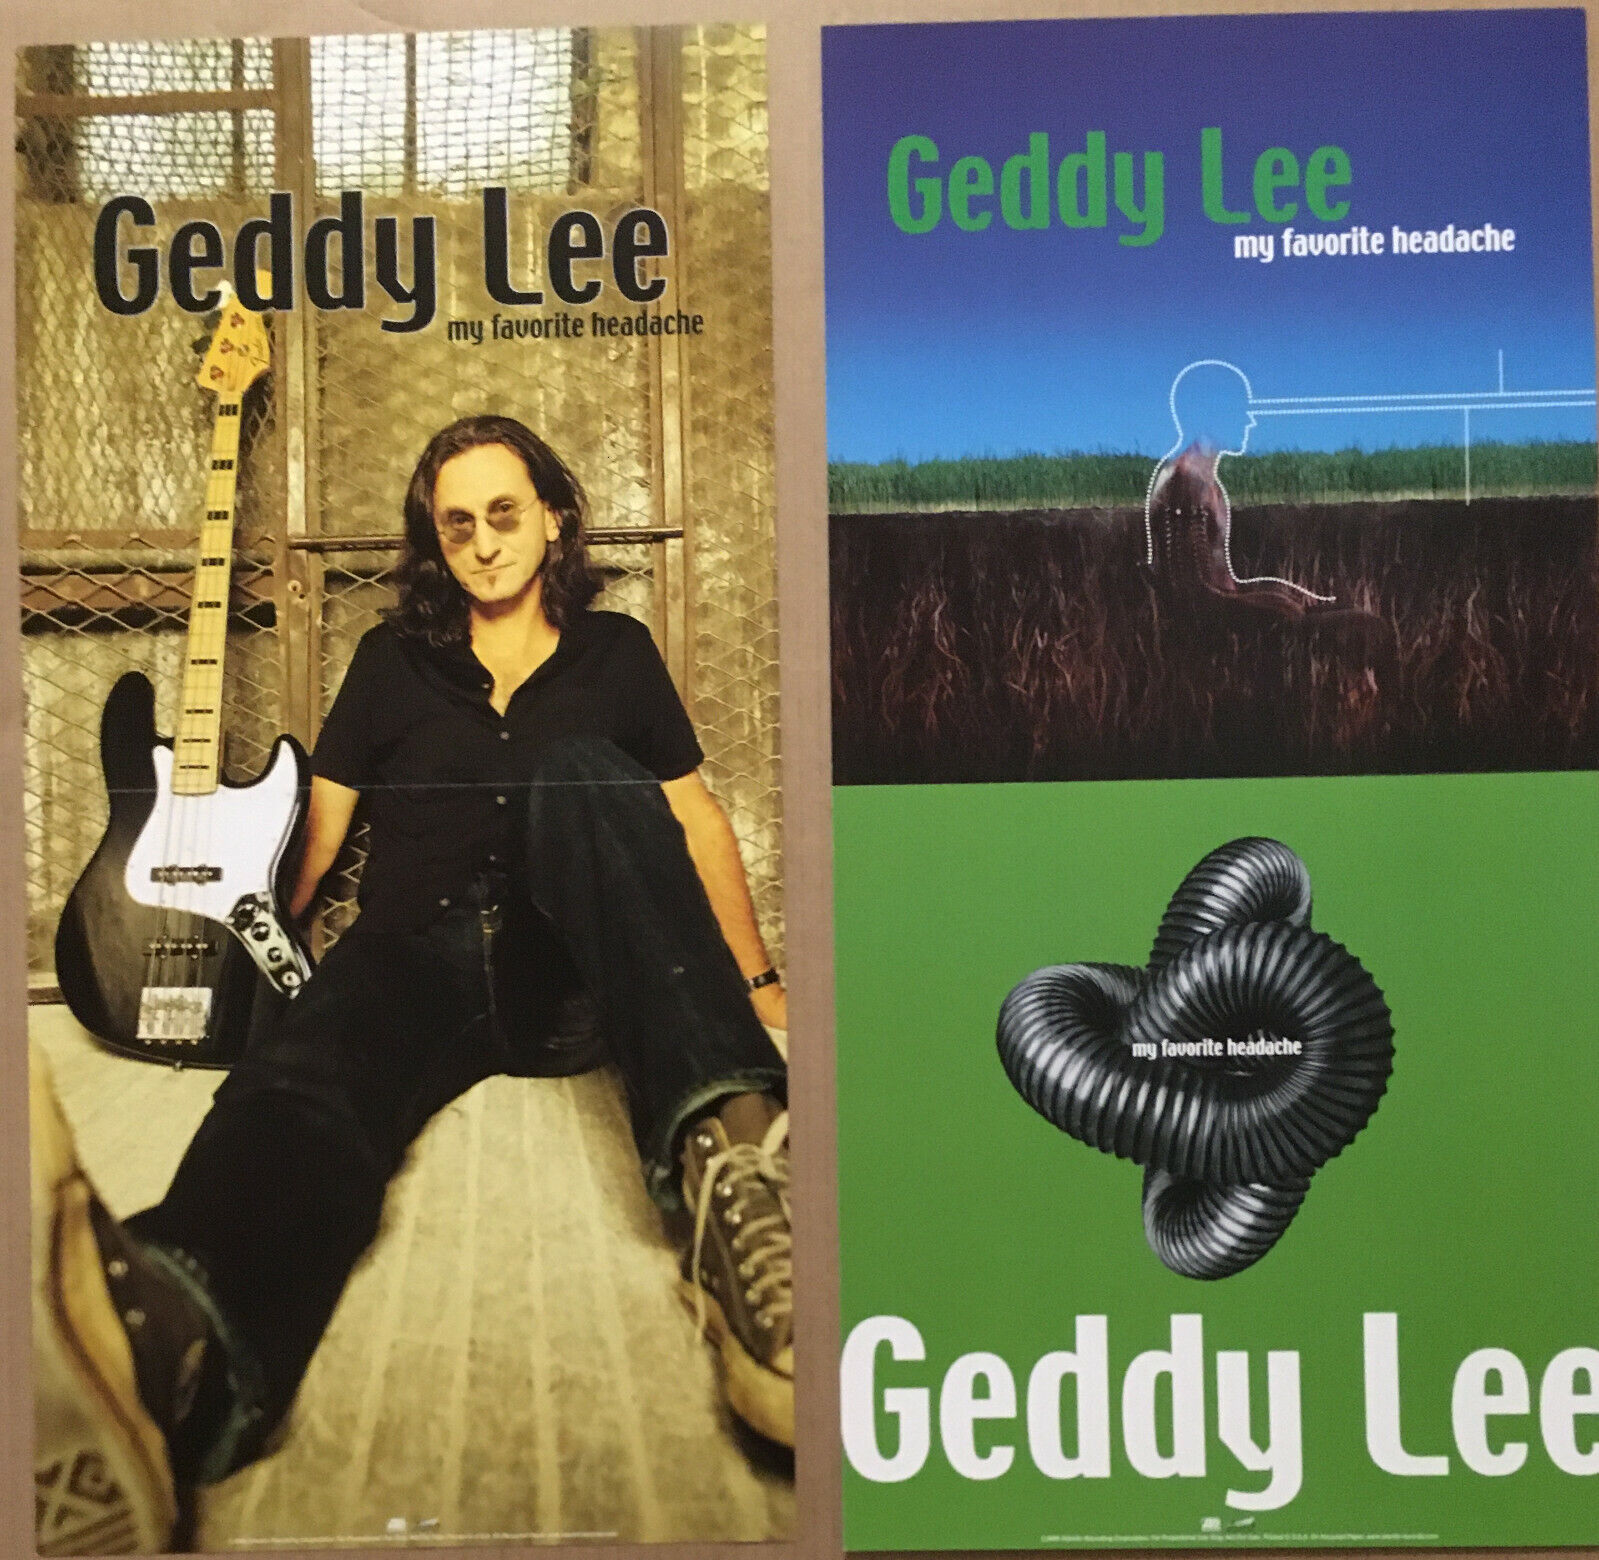 Rush GEDDY LEE Rare 2000 DOUBLE SIDED PROMO POSTER FLAT for My CD MINT USA 12x24